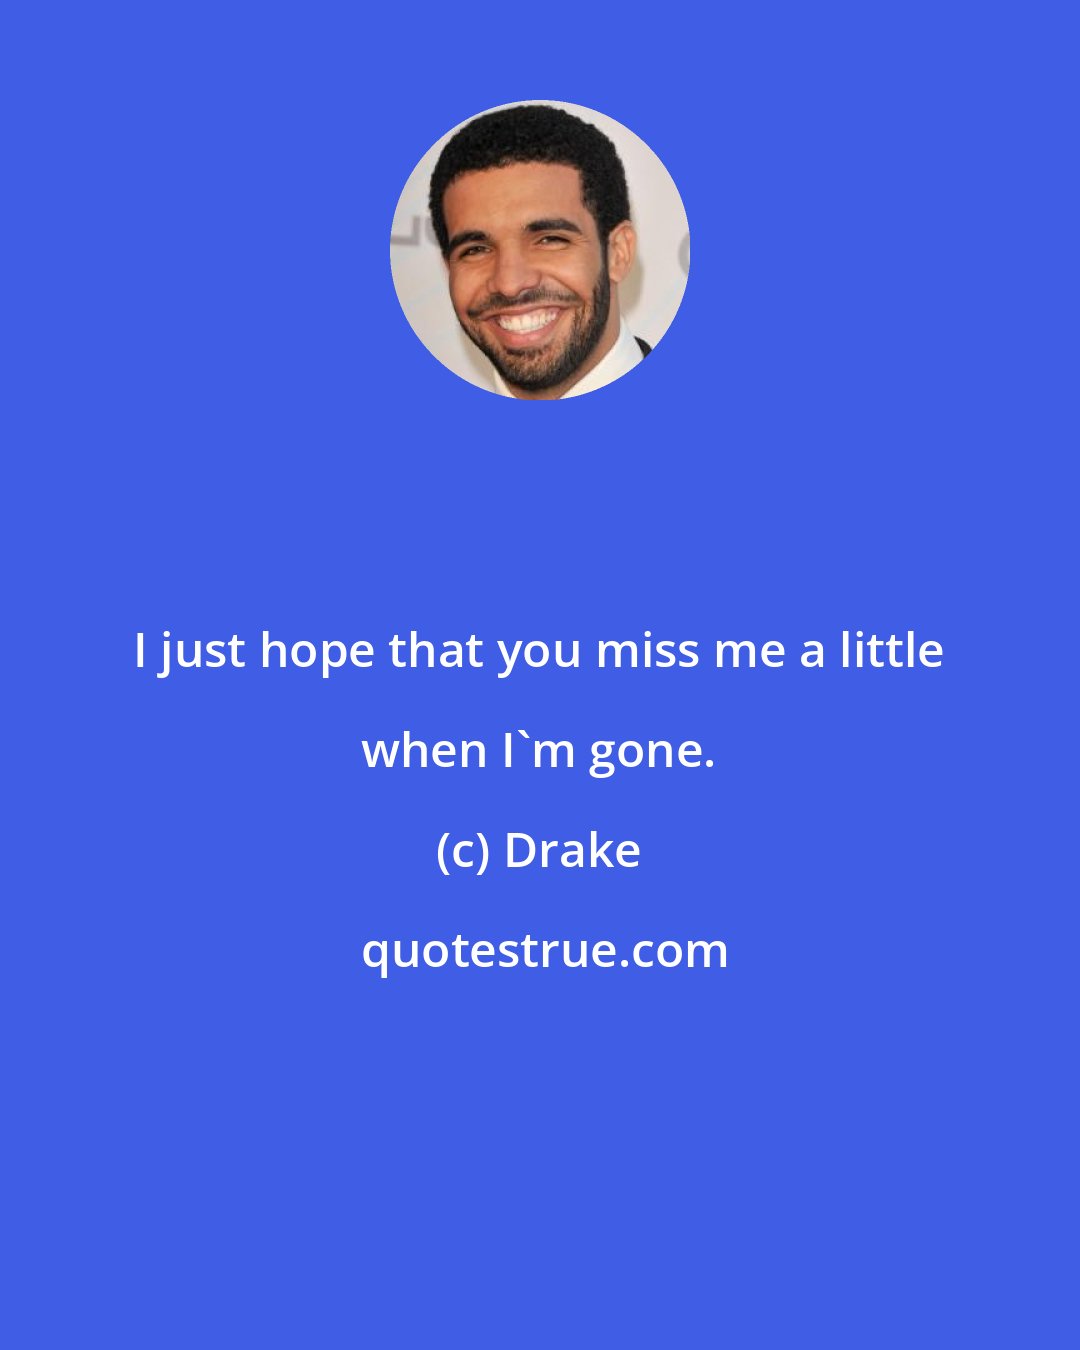 Drake: I just hope that you miss me a little when I'm gone.